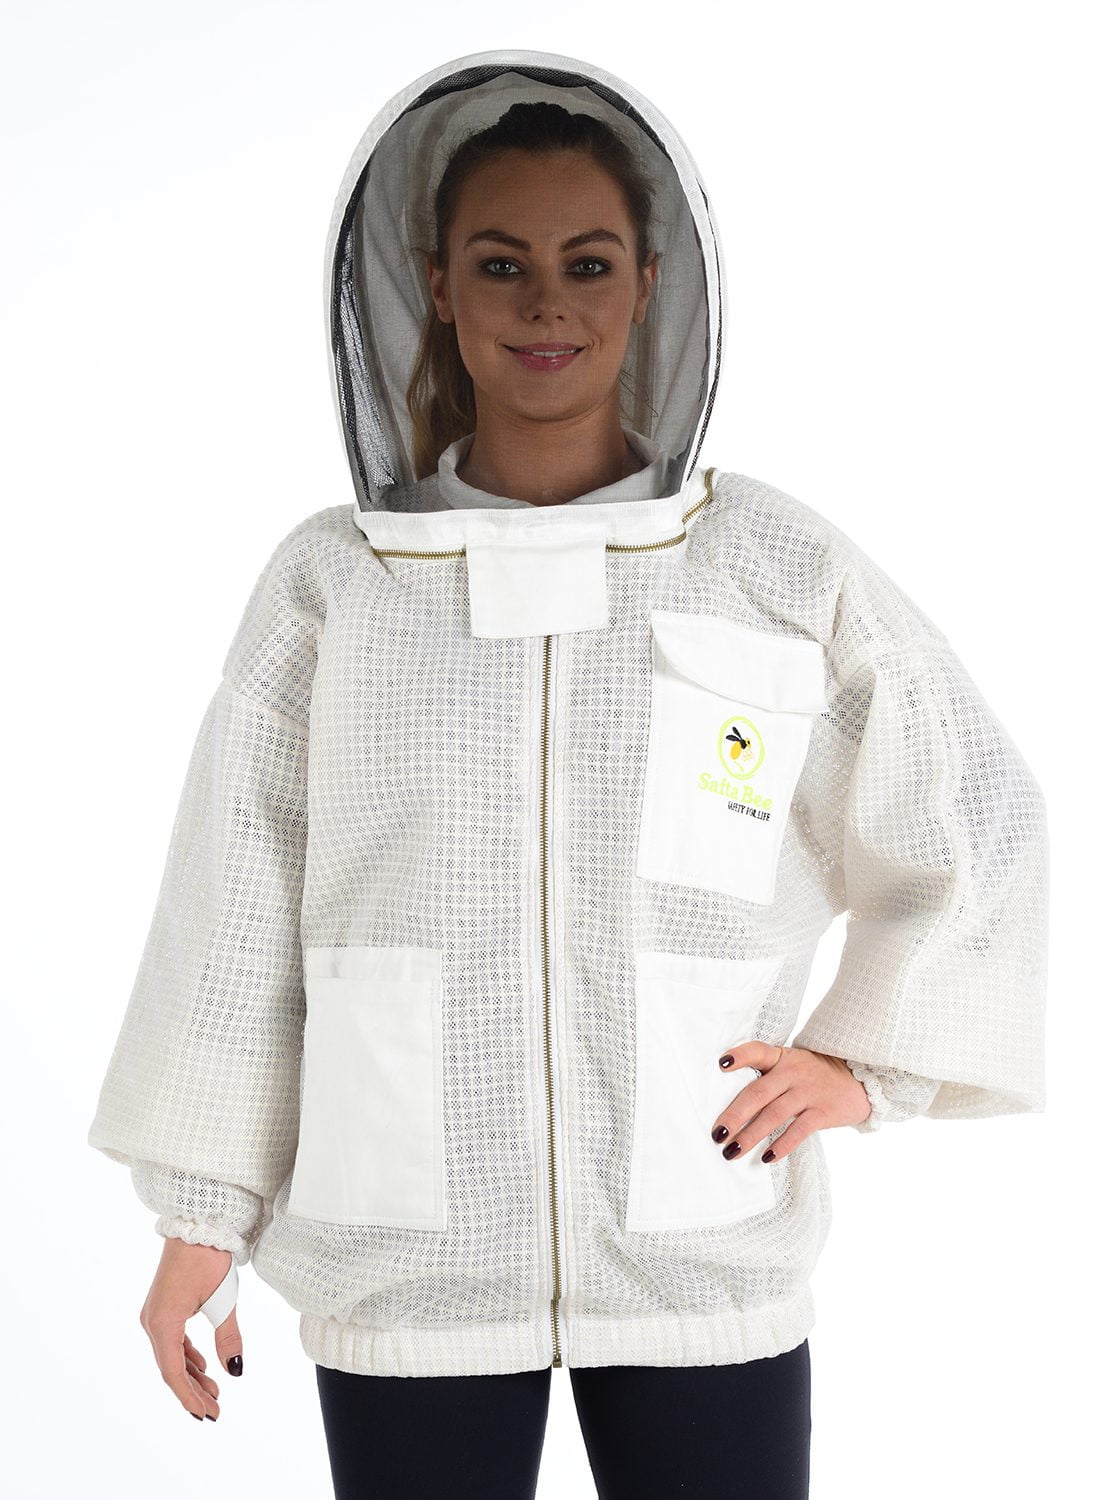 Bee Keeper Suit Beekeeping Veil Jacket Protection Outfit Hat Sting Proof M L XL 